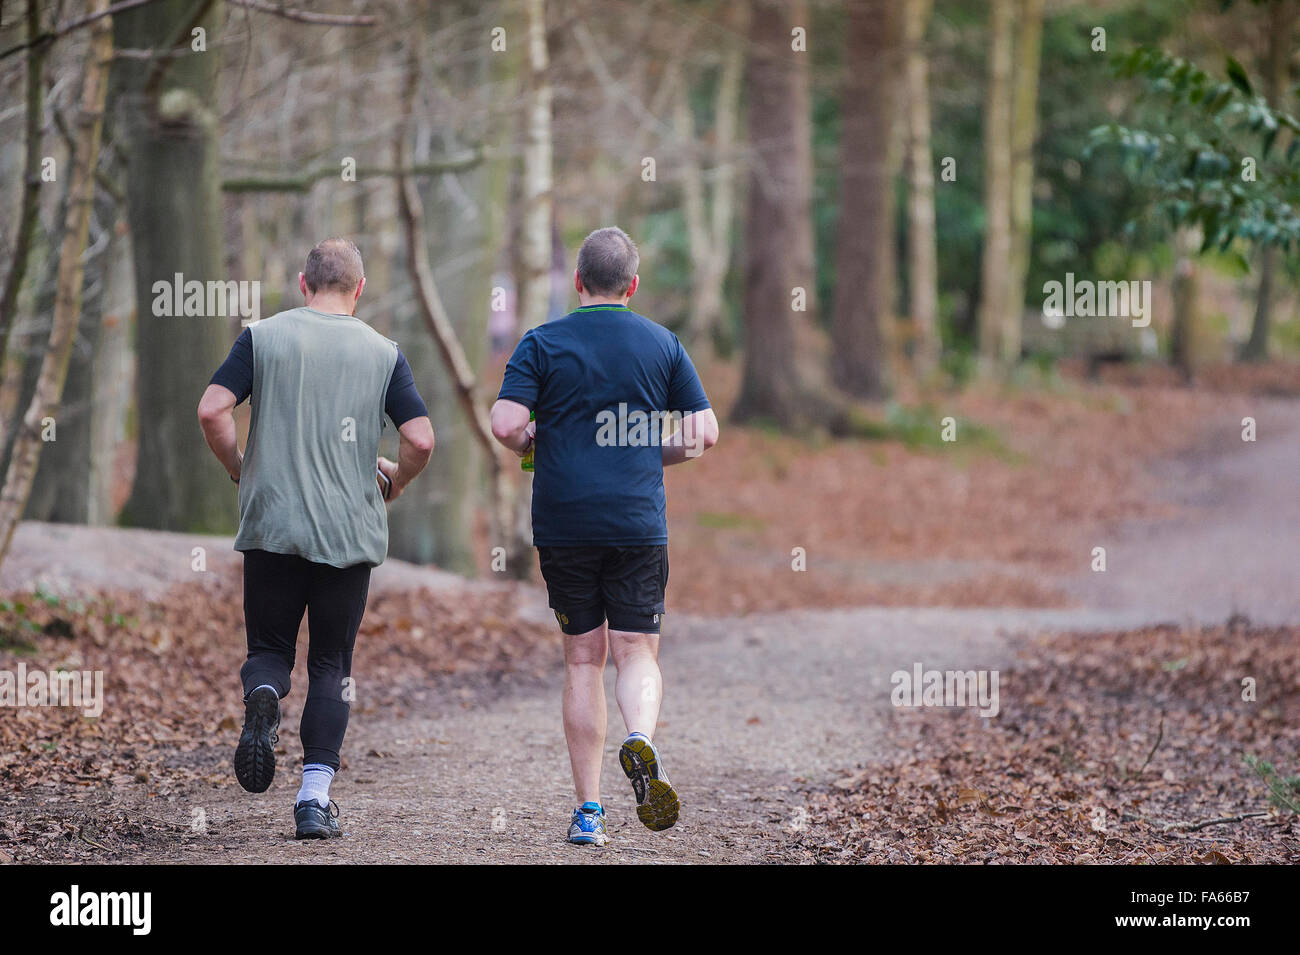 Mature runners exercising in Thorndon Park woodland in Essex, England, United Kingdom. Stock Photo